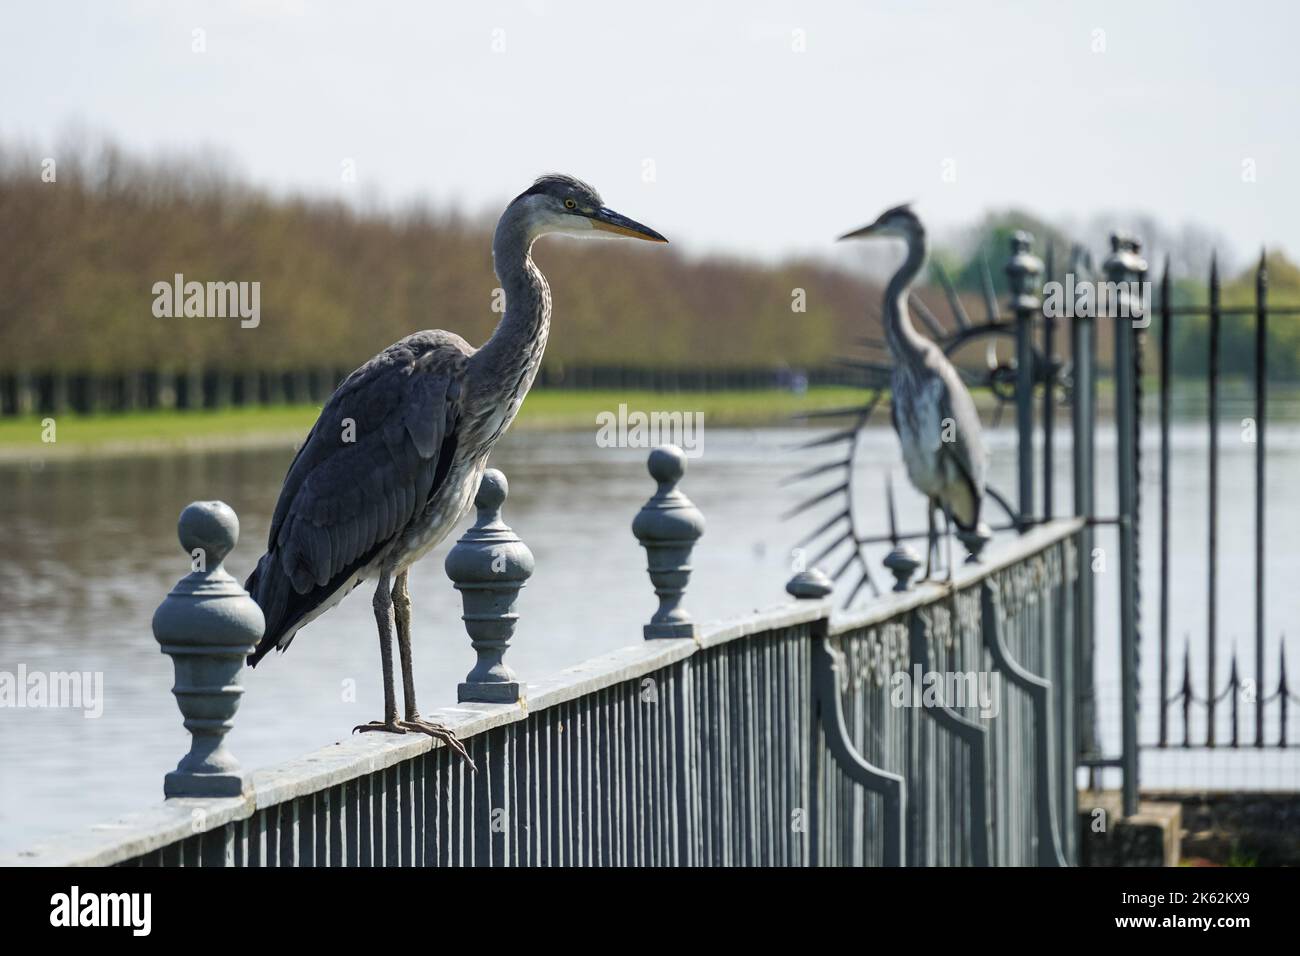 Two herons on the fence, UK Stock Photo